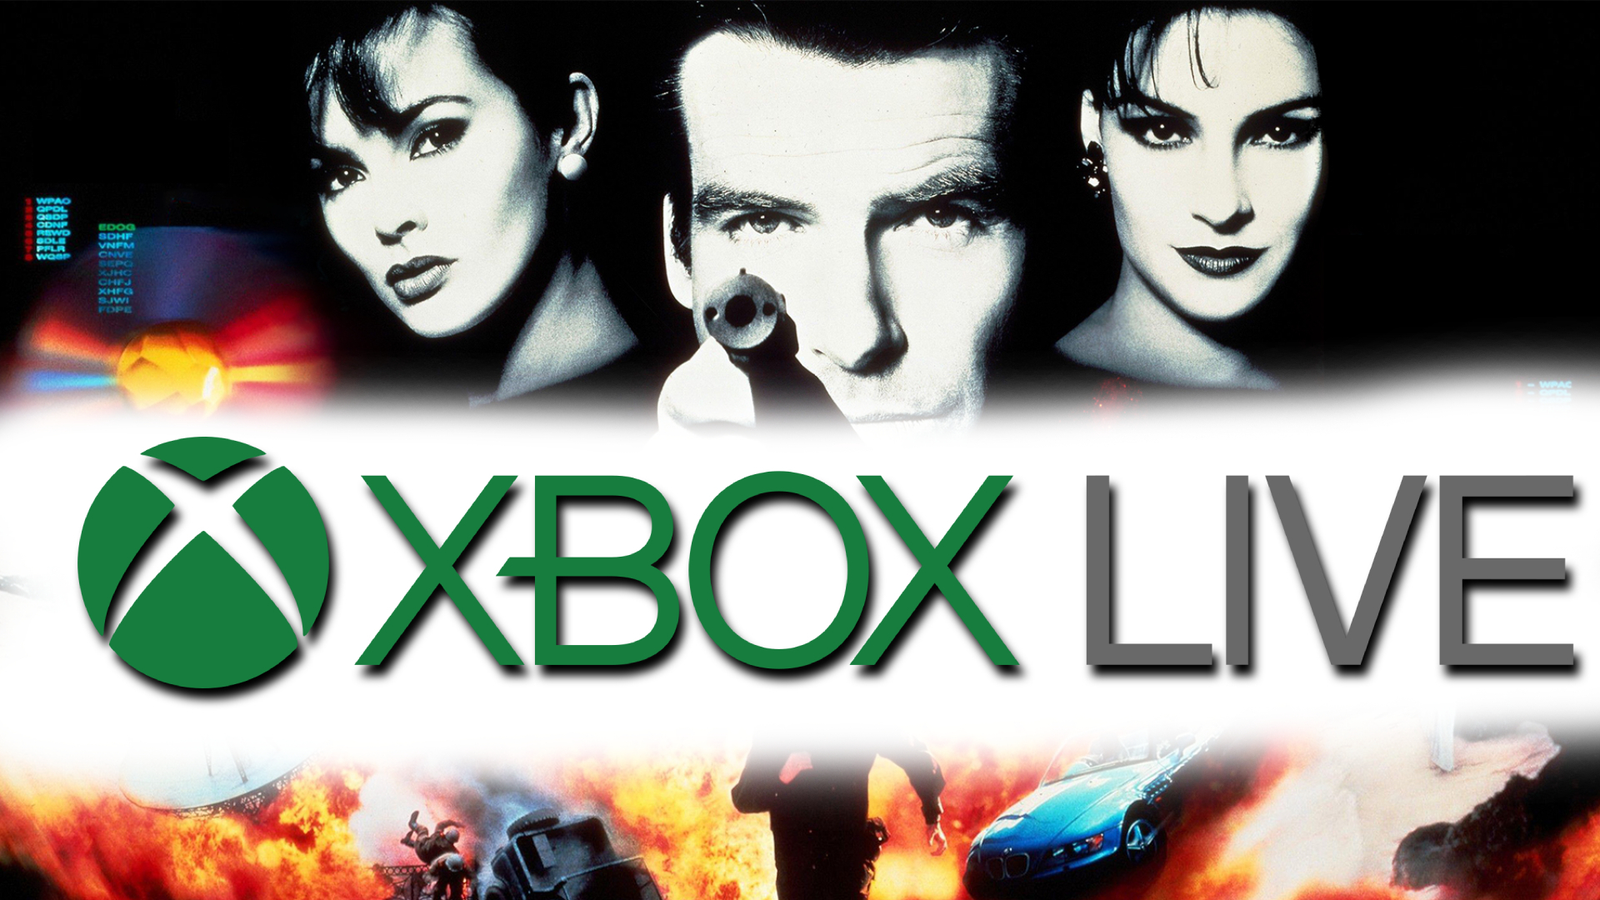 GoldenEye 007 Remastered release date as Switch & Xbox confirmed